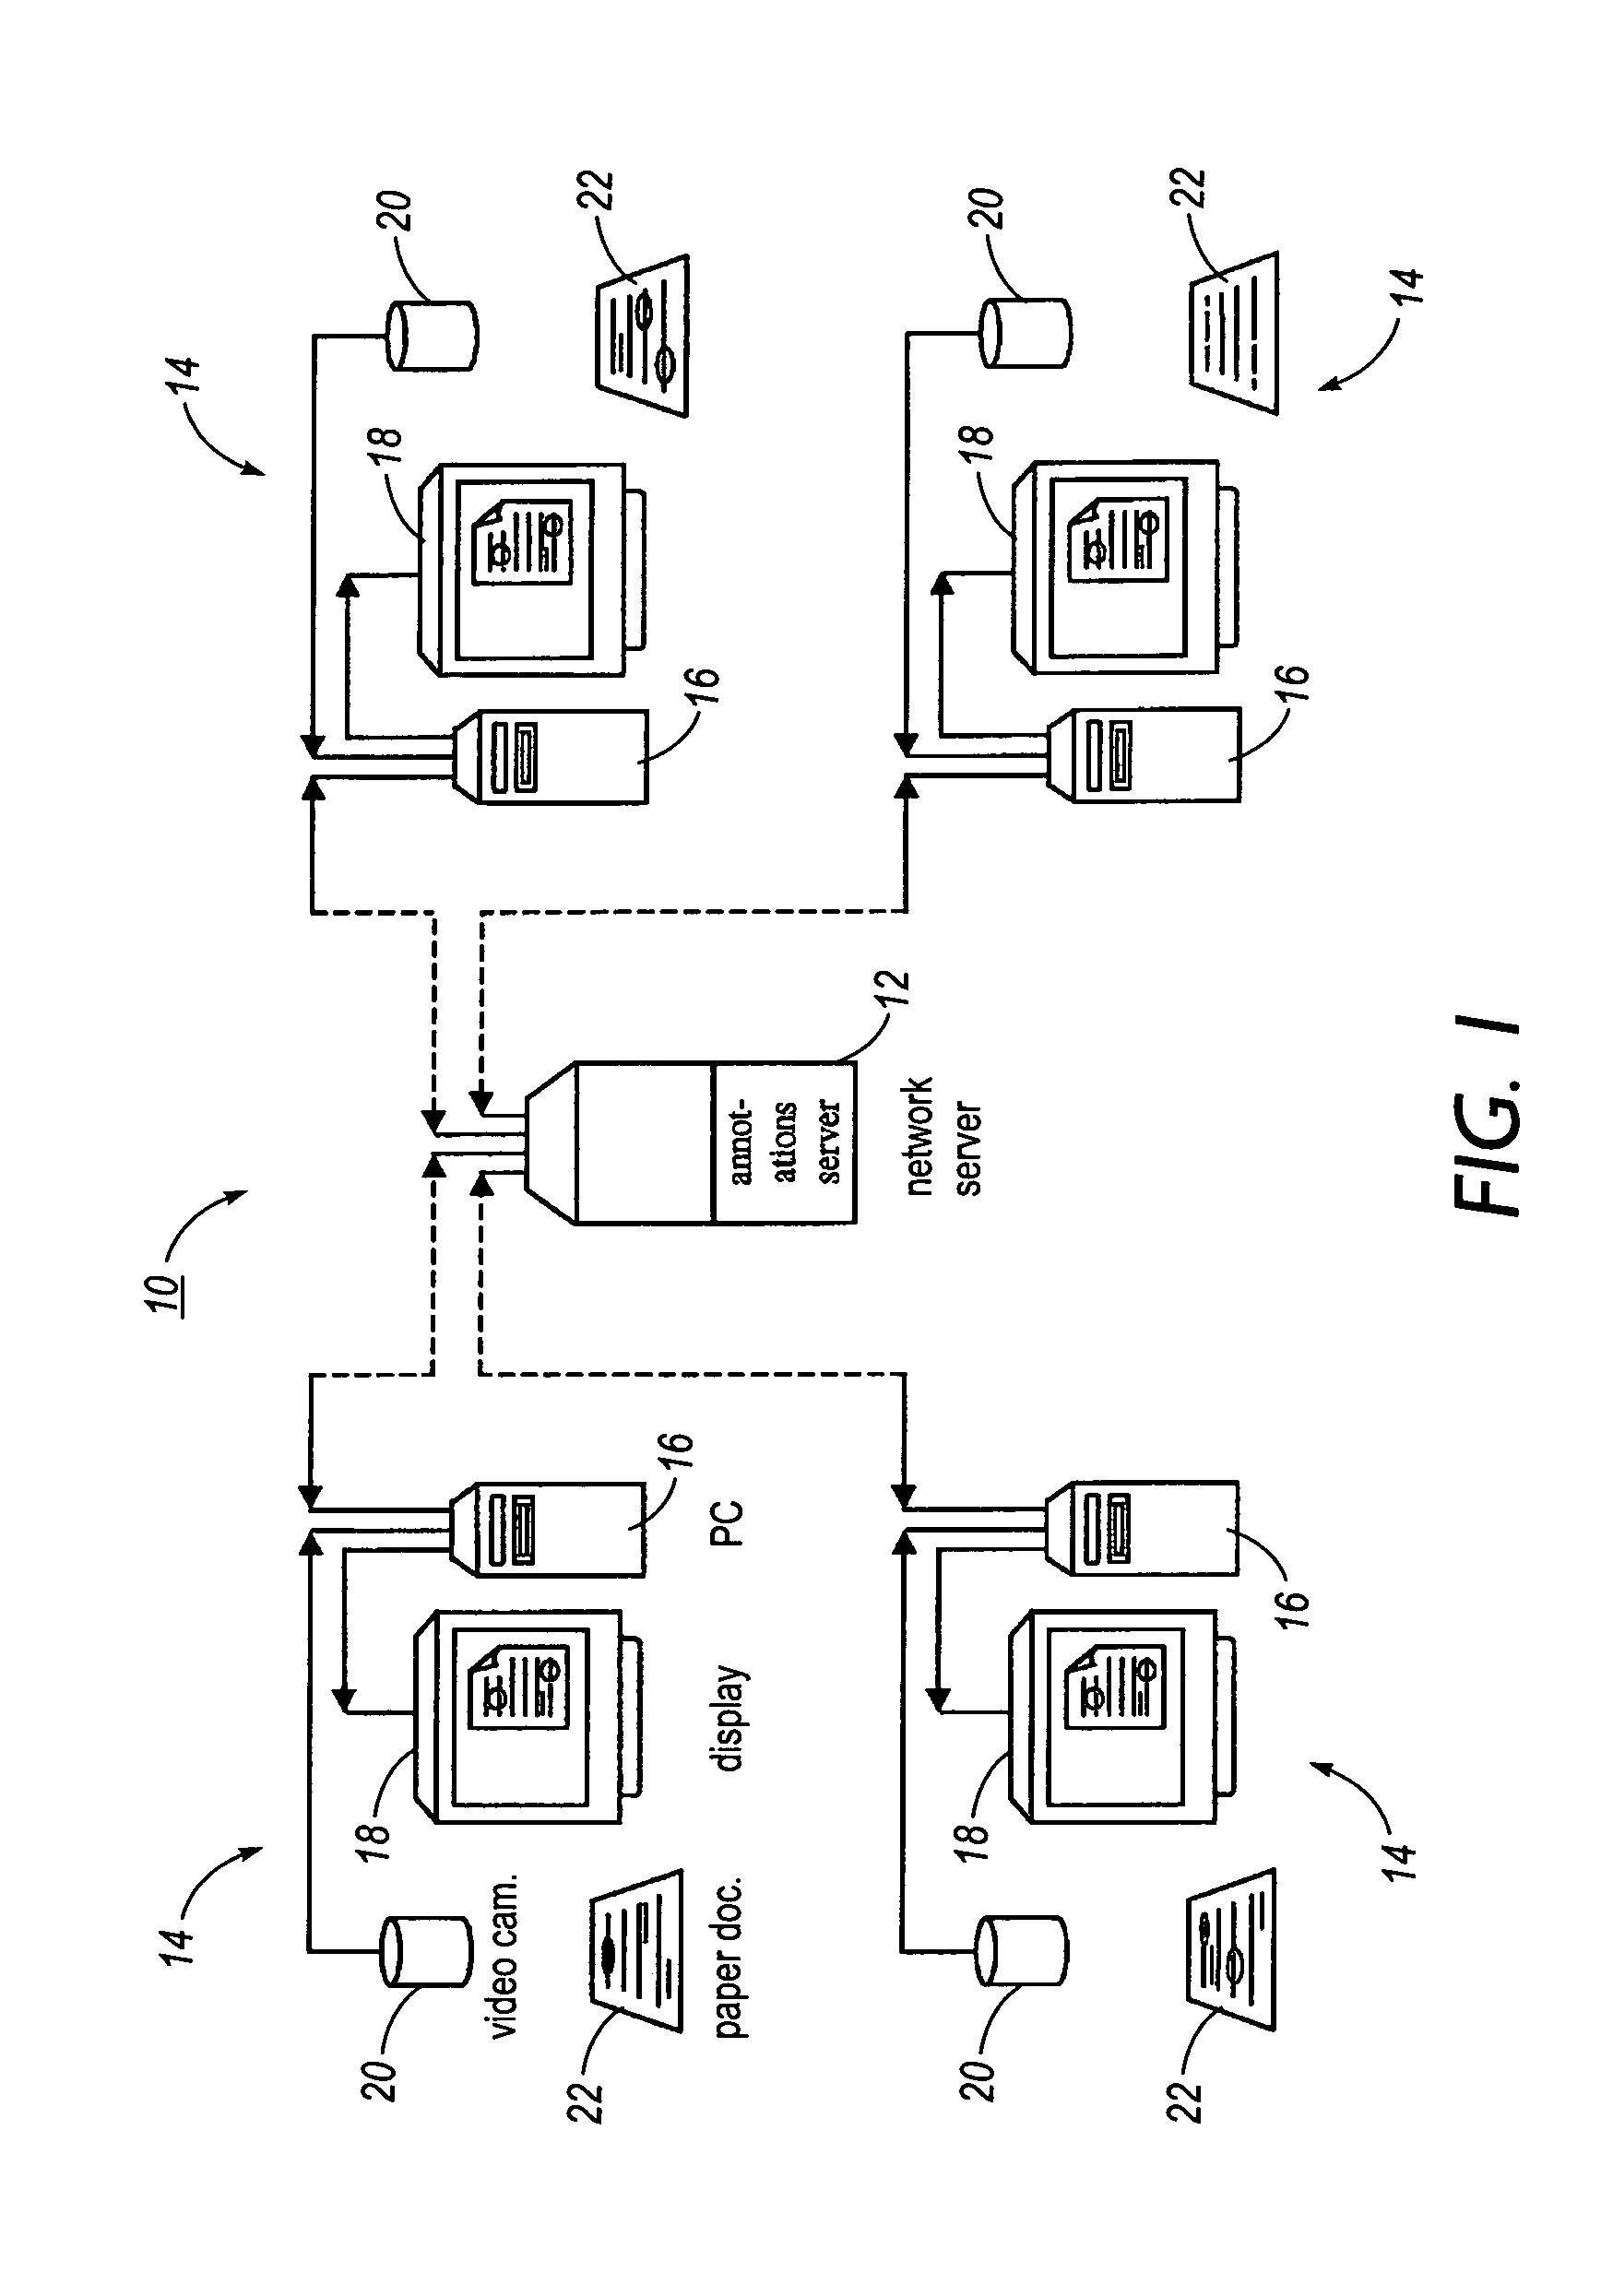 Method and apparatus for collaborative annotation of a document